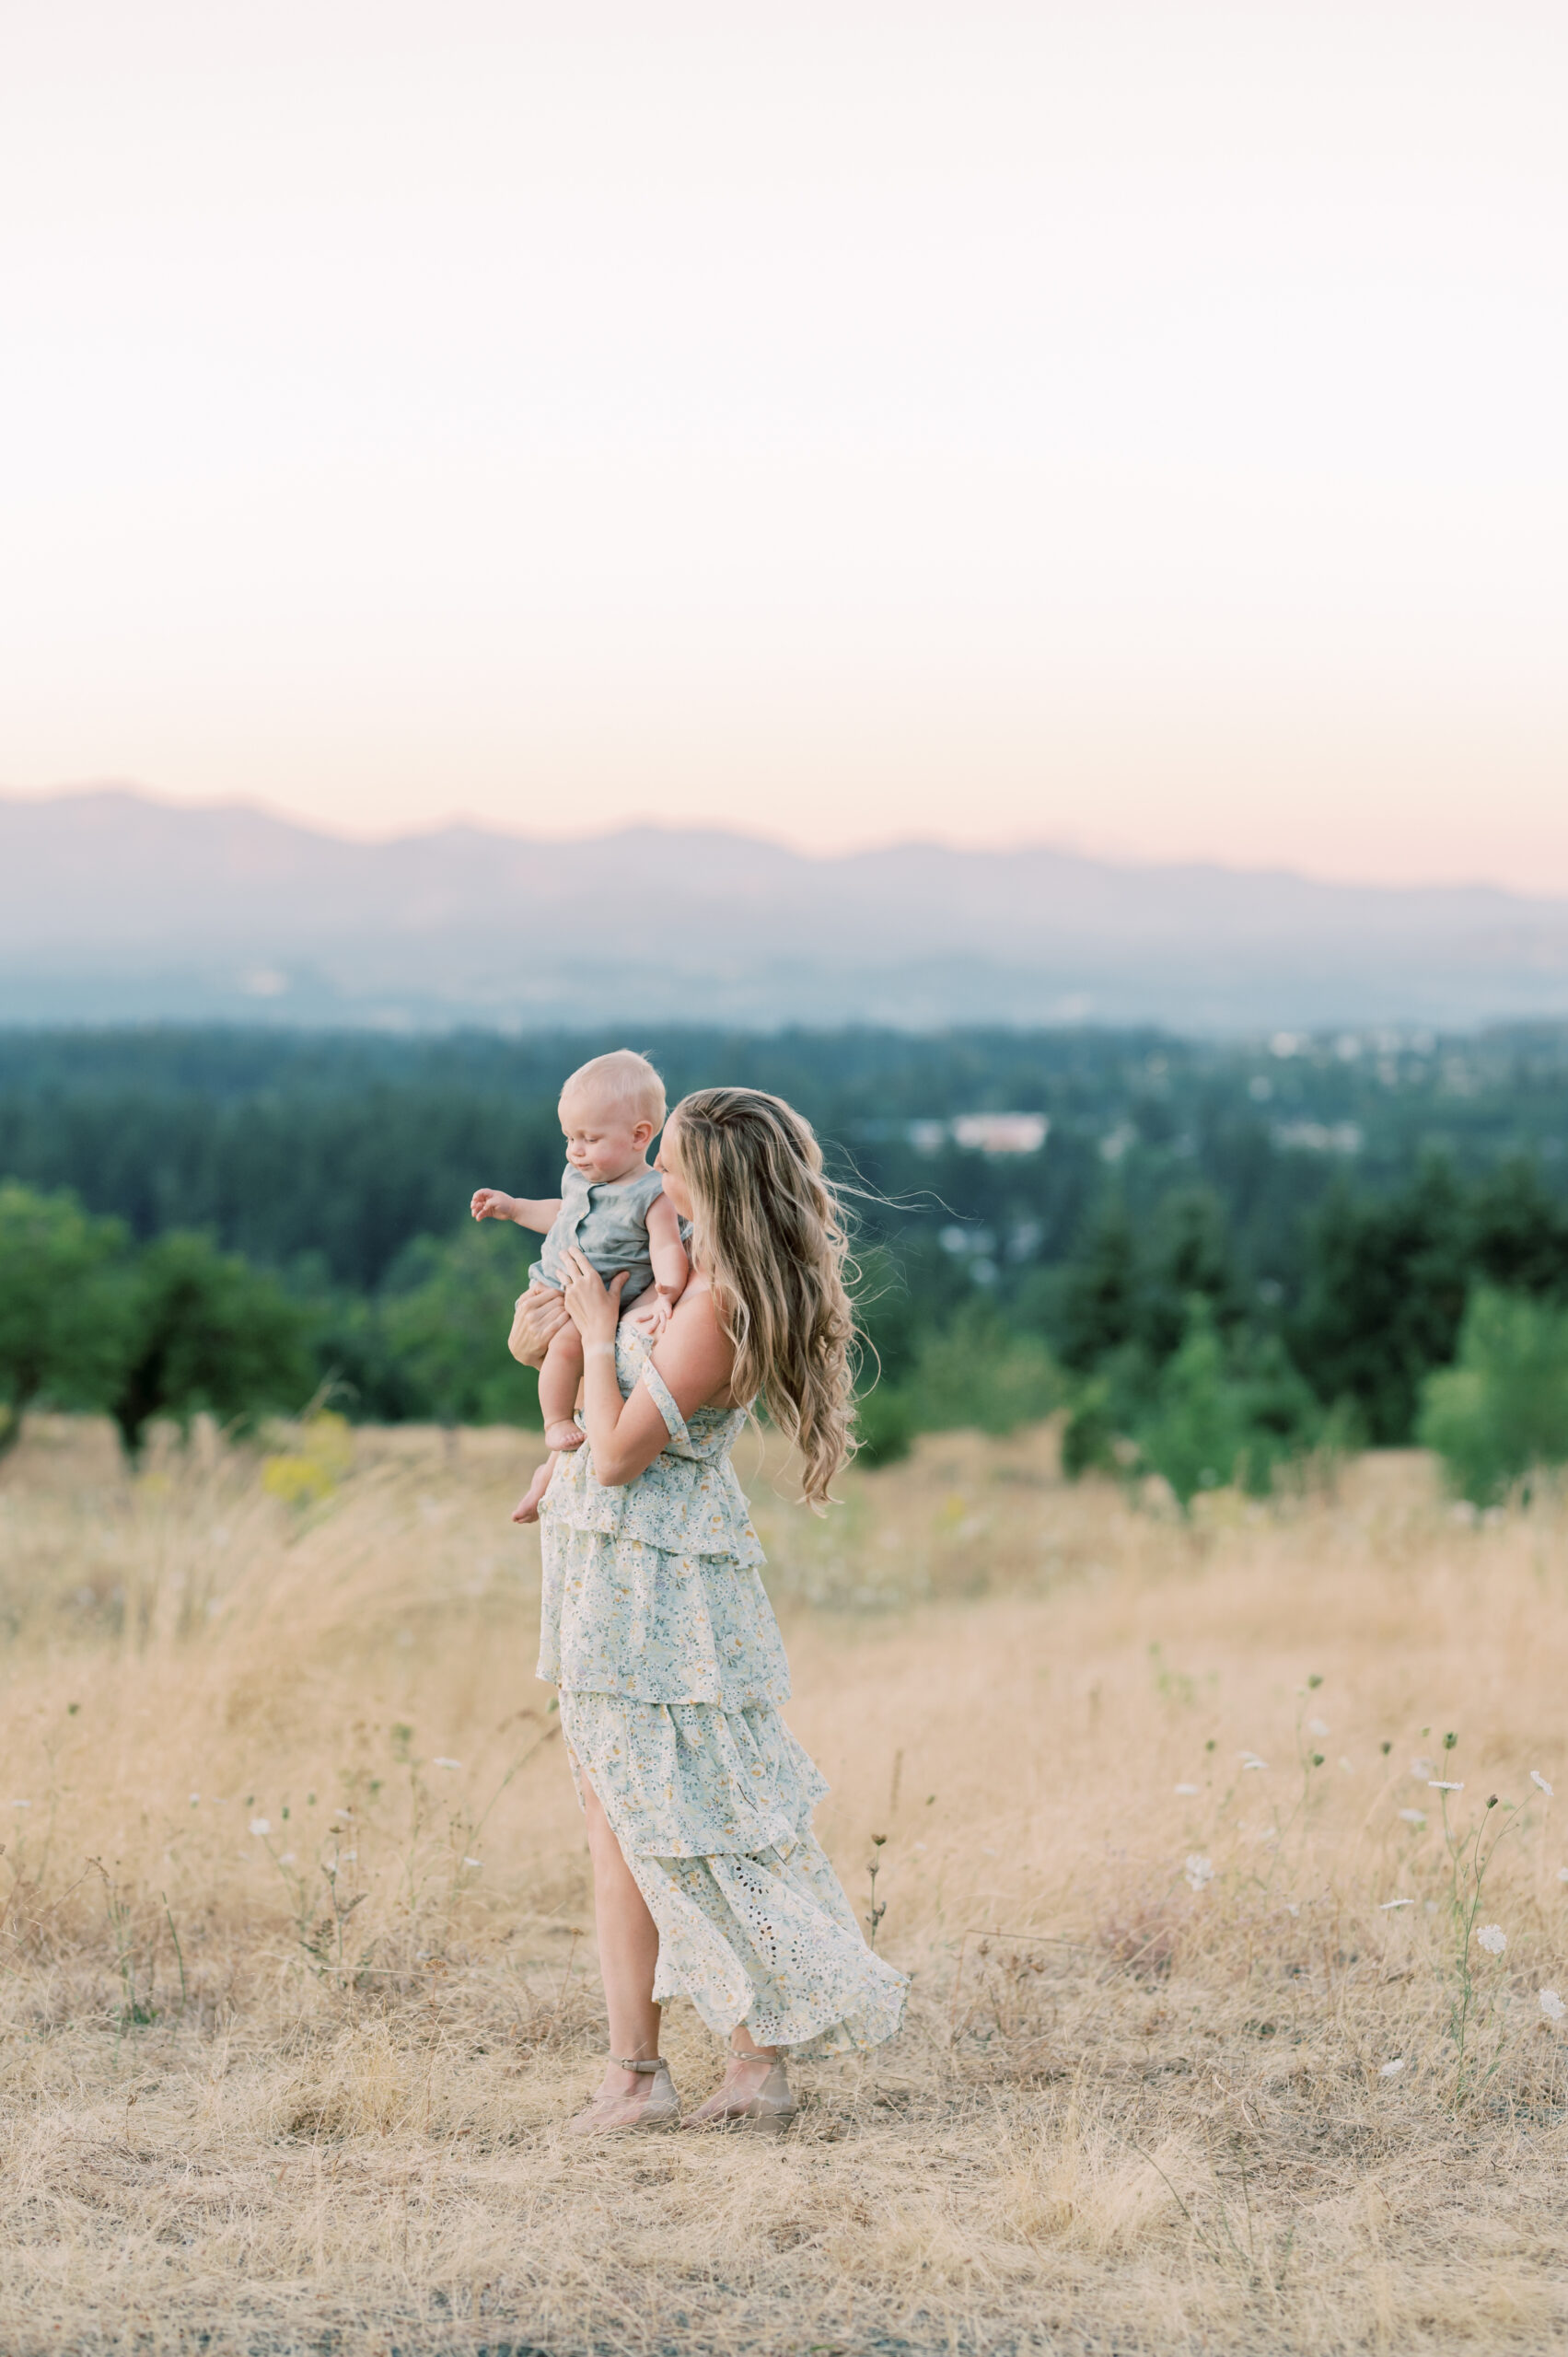 Mother with long blonde hair soft curls wearing a long flowy tiered mint green dress holding her young child, kissing his hand, standing in an empty field overlooking the city of portland with green trees, sparkling lights, and a colorful sunset of blues, oranges, and pink skylines.